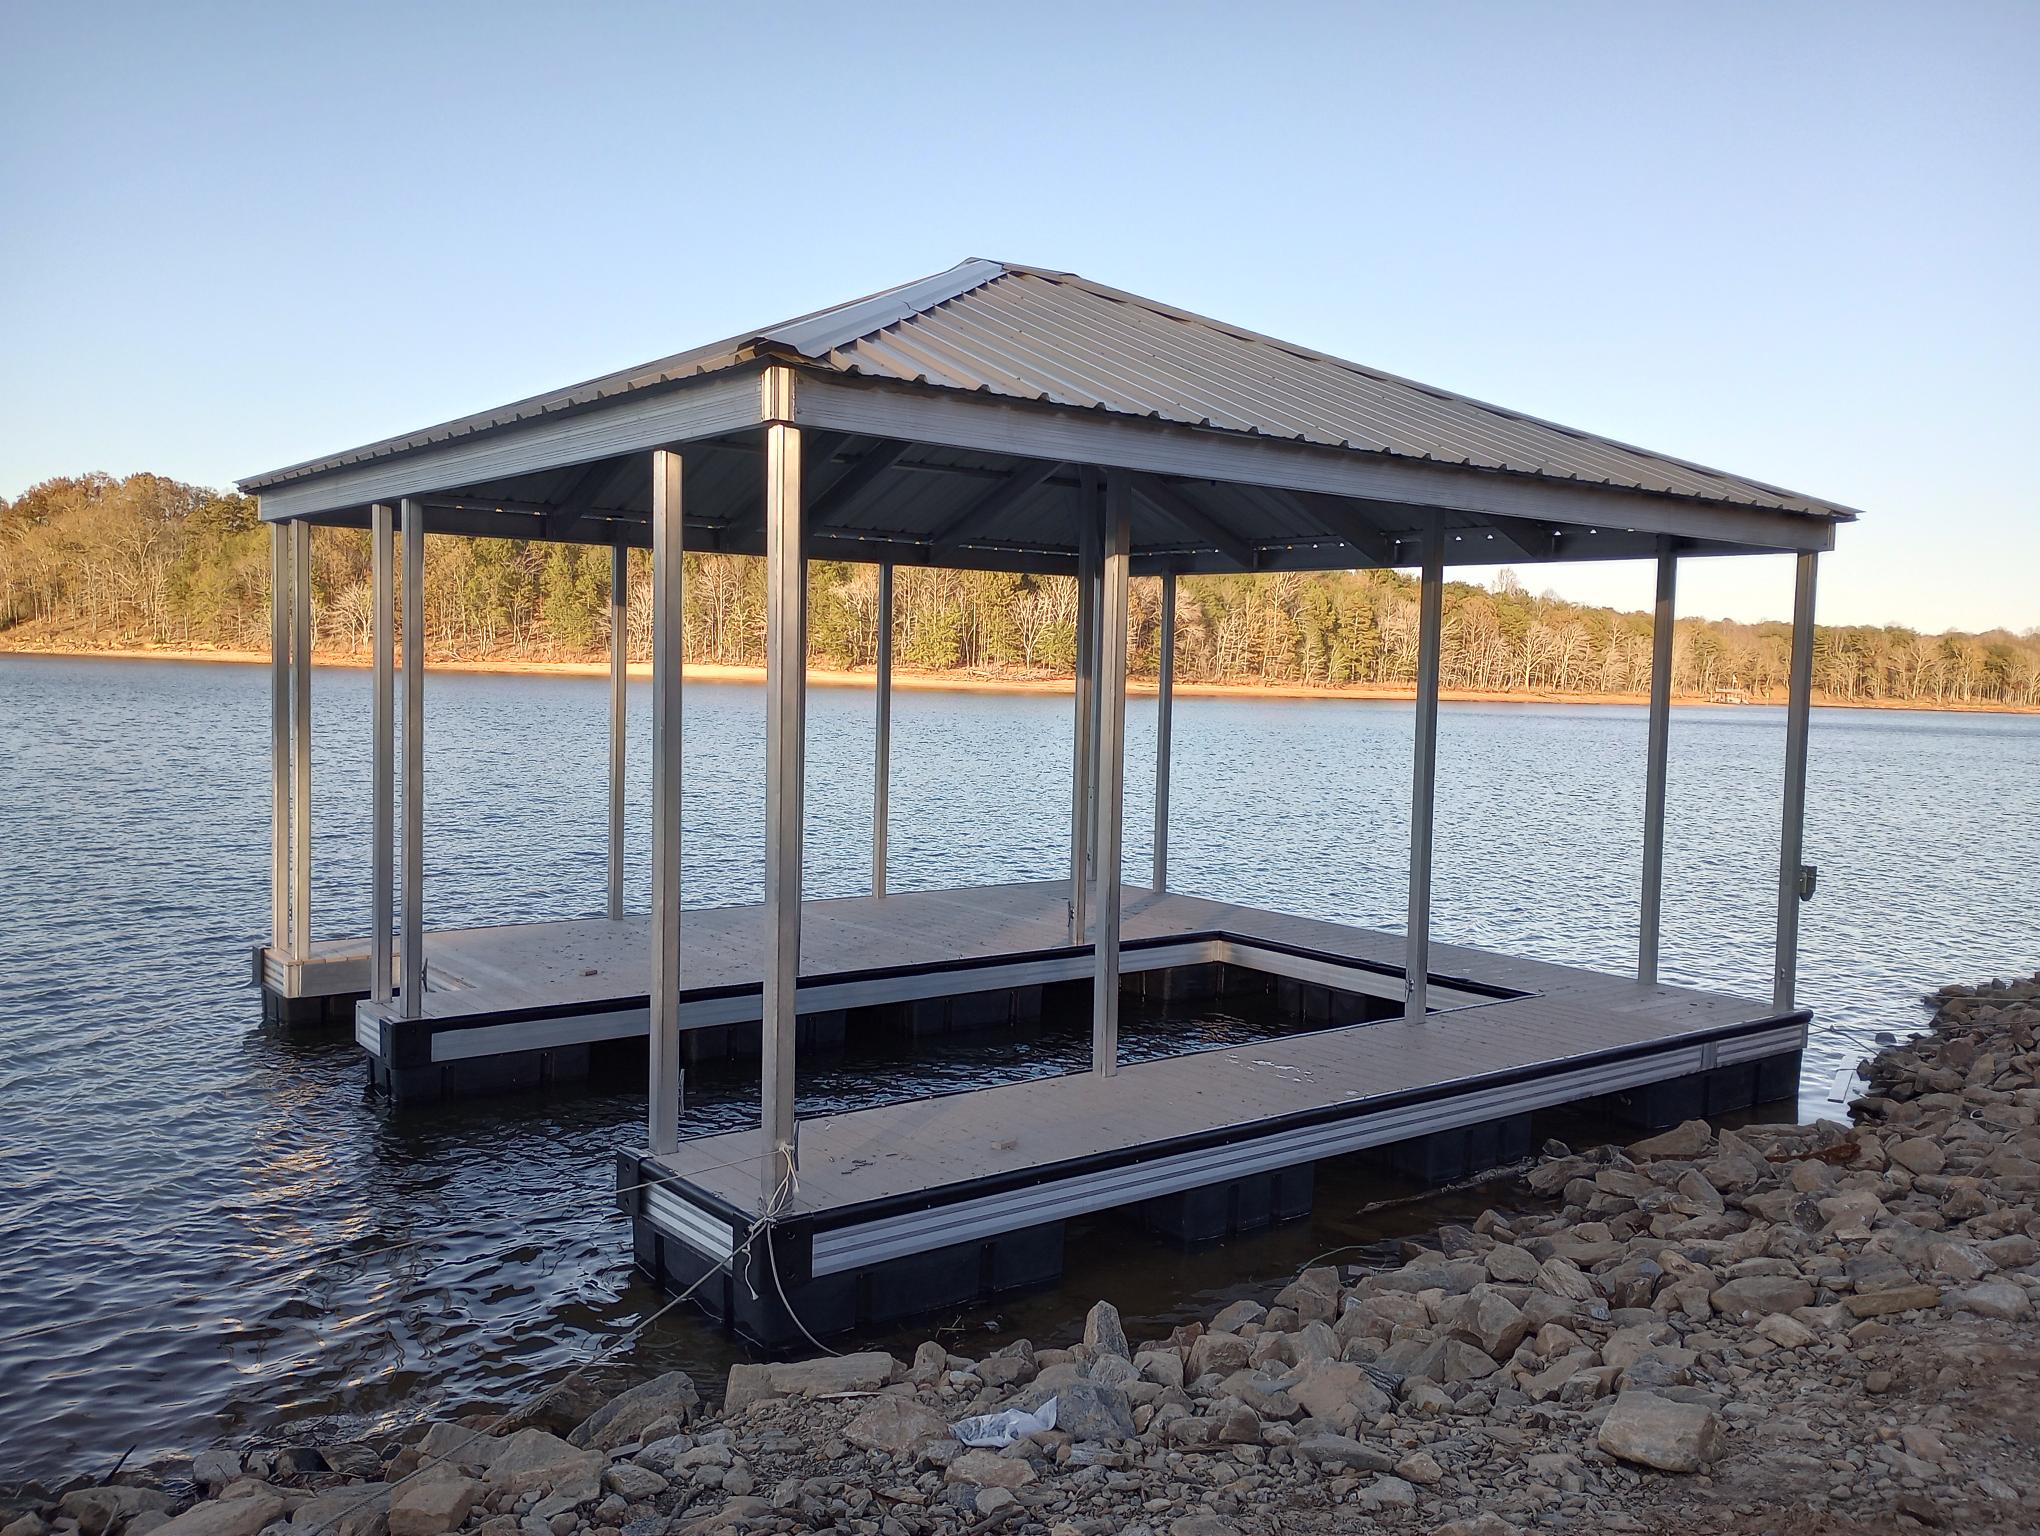 Don’t Let Winter Sink Your Dock: Essential Steps to Winterize Safely